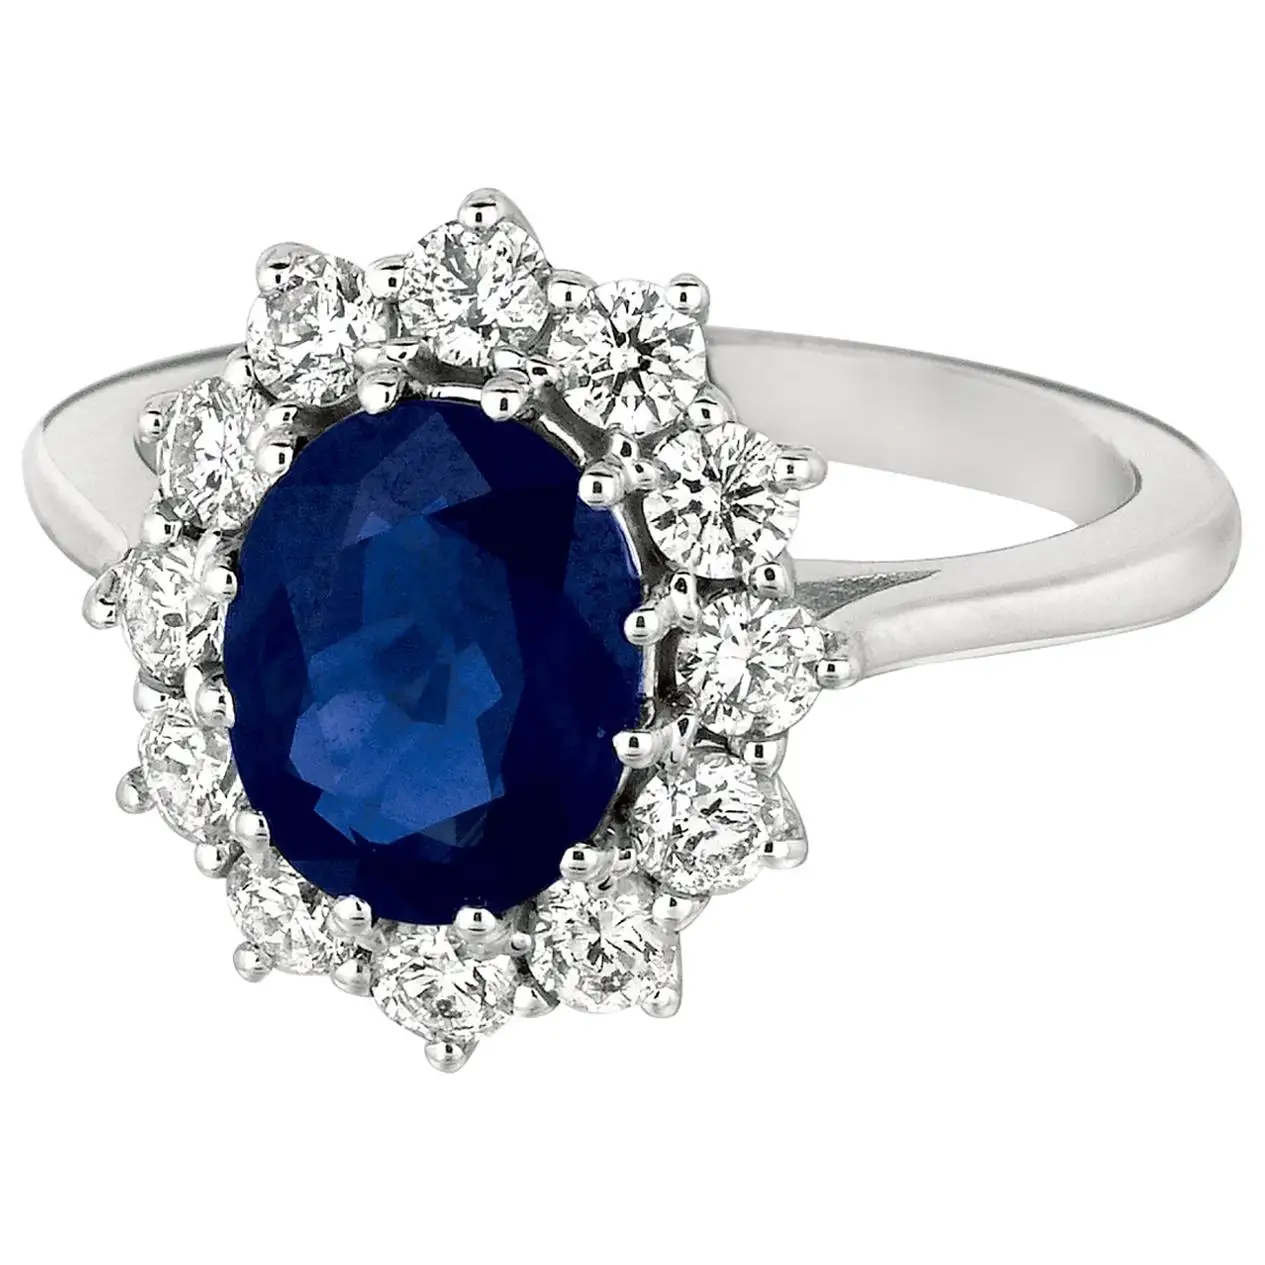 Princess-Diana-Inspired-3.55-Carat-Oval-Sapphire-and-Diamond-Ring-14K-White-Gold-1.webp